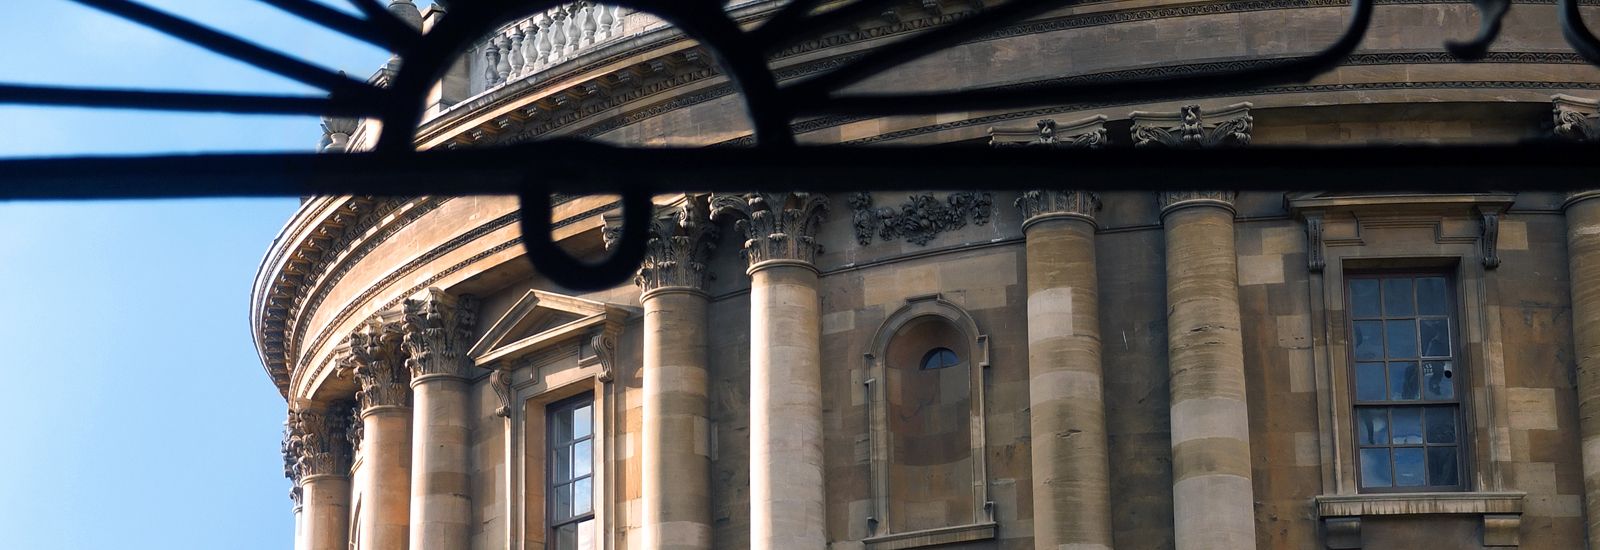 The side of the Radcliffe Camera through a black gate